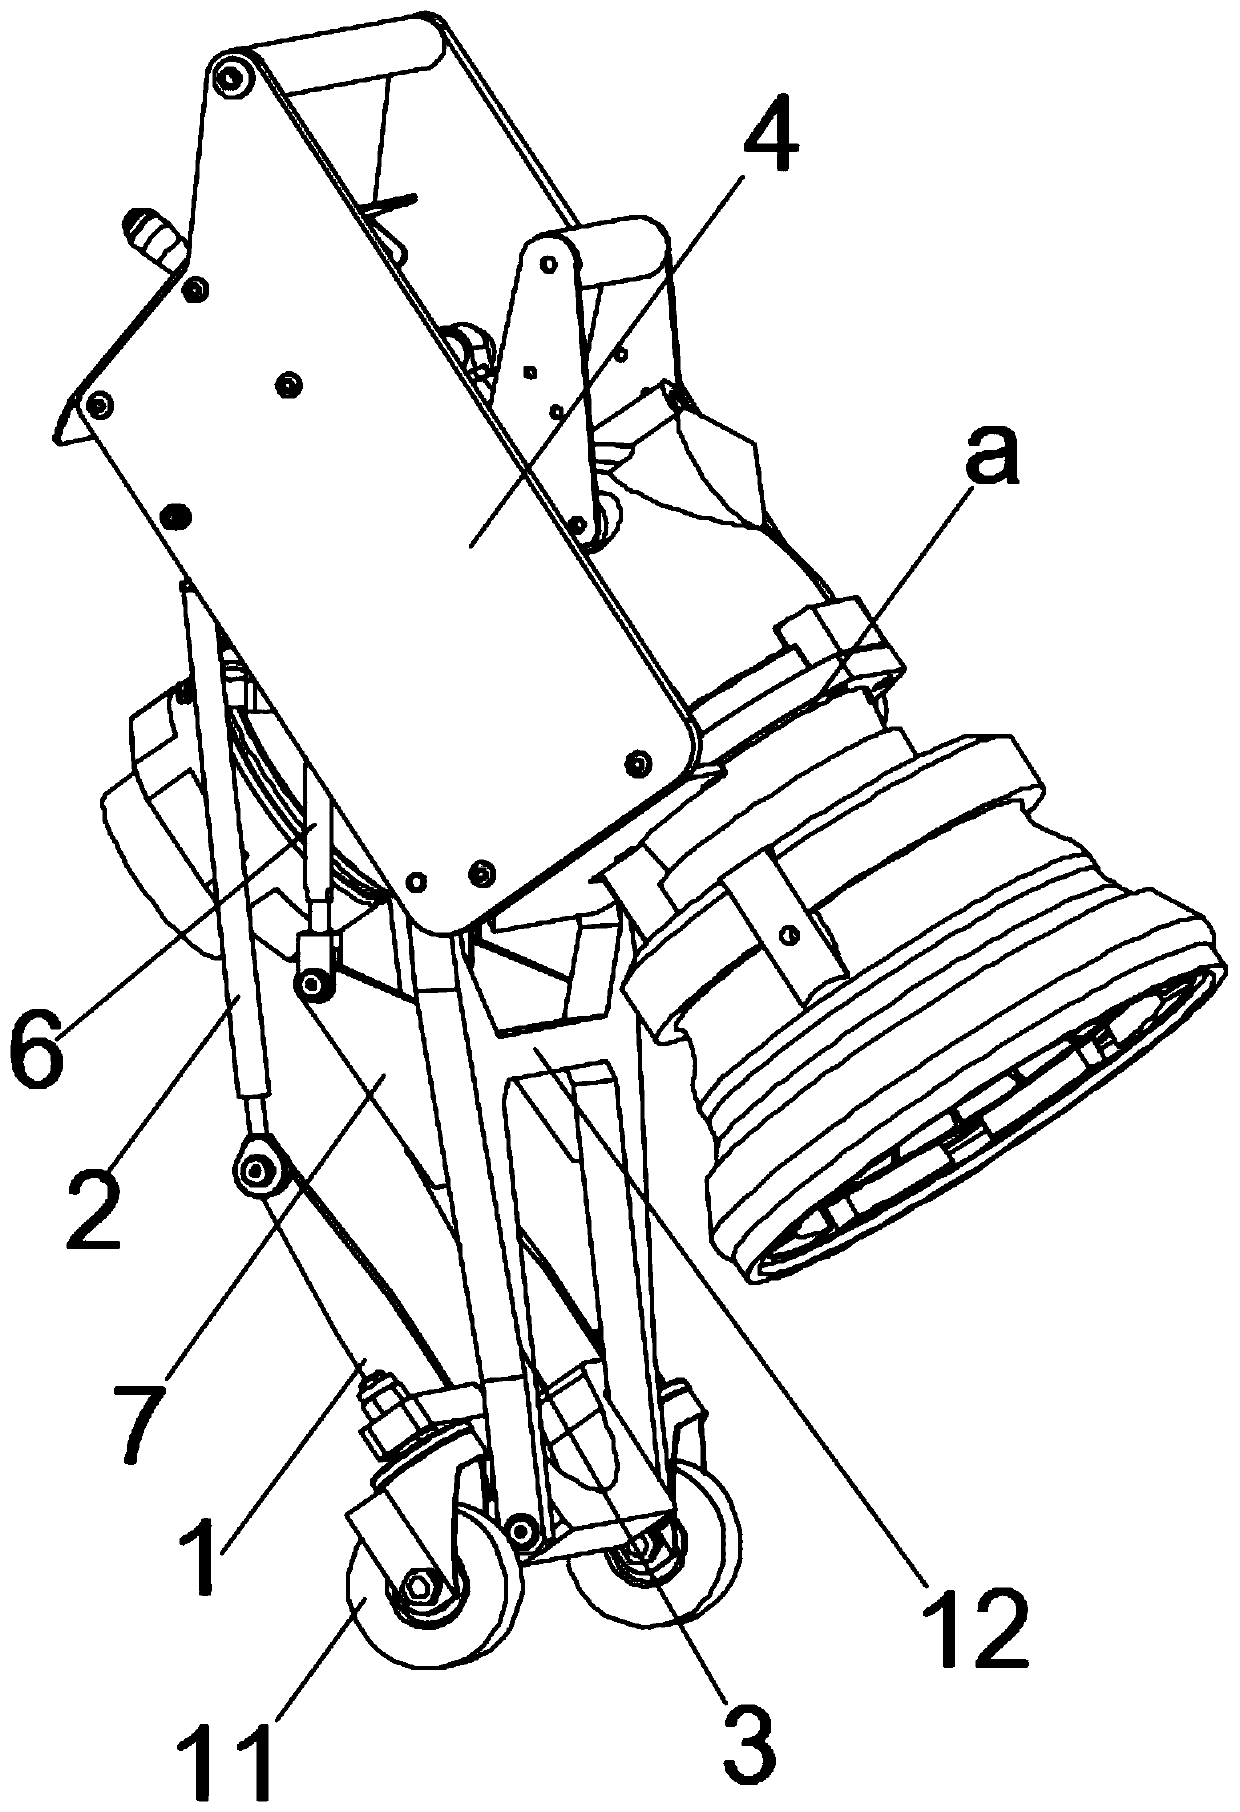 Aviation refueling connector lifting device